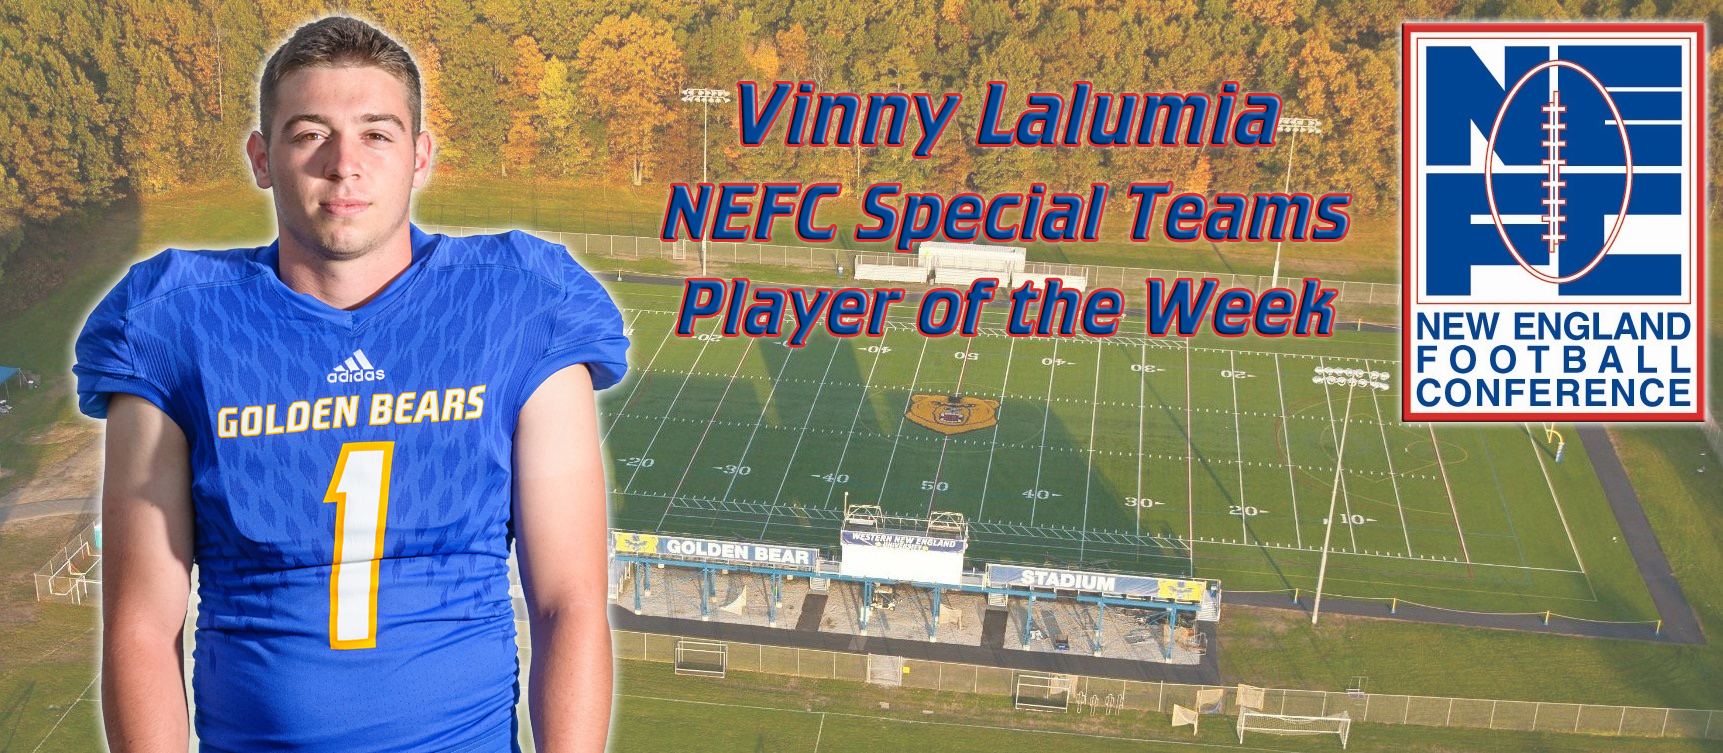 Vinny Lalumia Named NEFC Special Teams Player of the Week